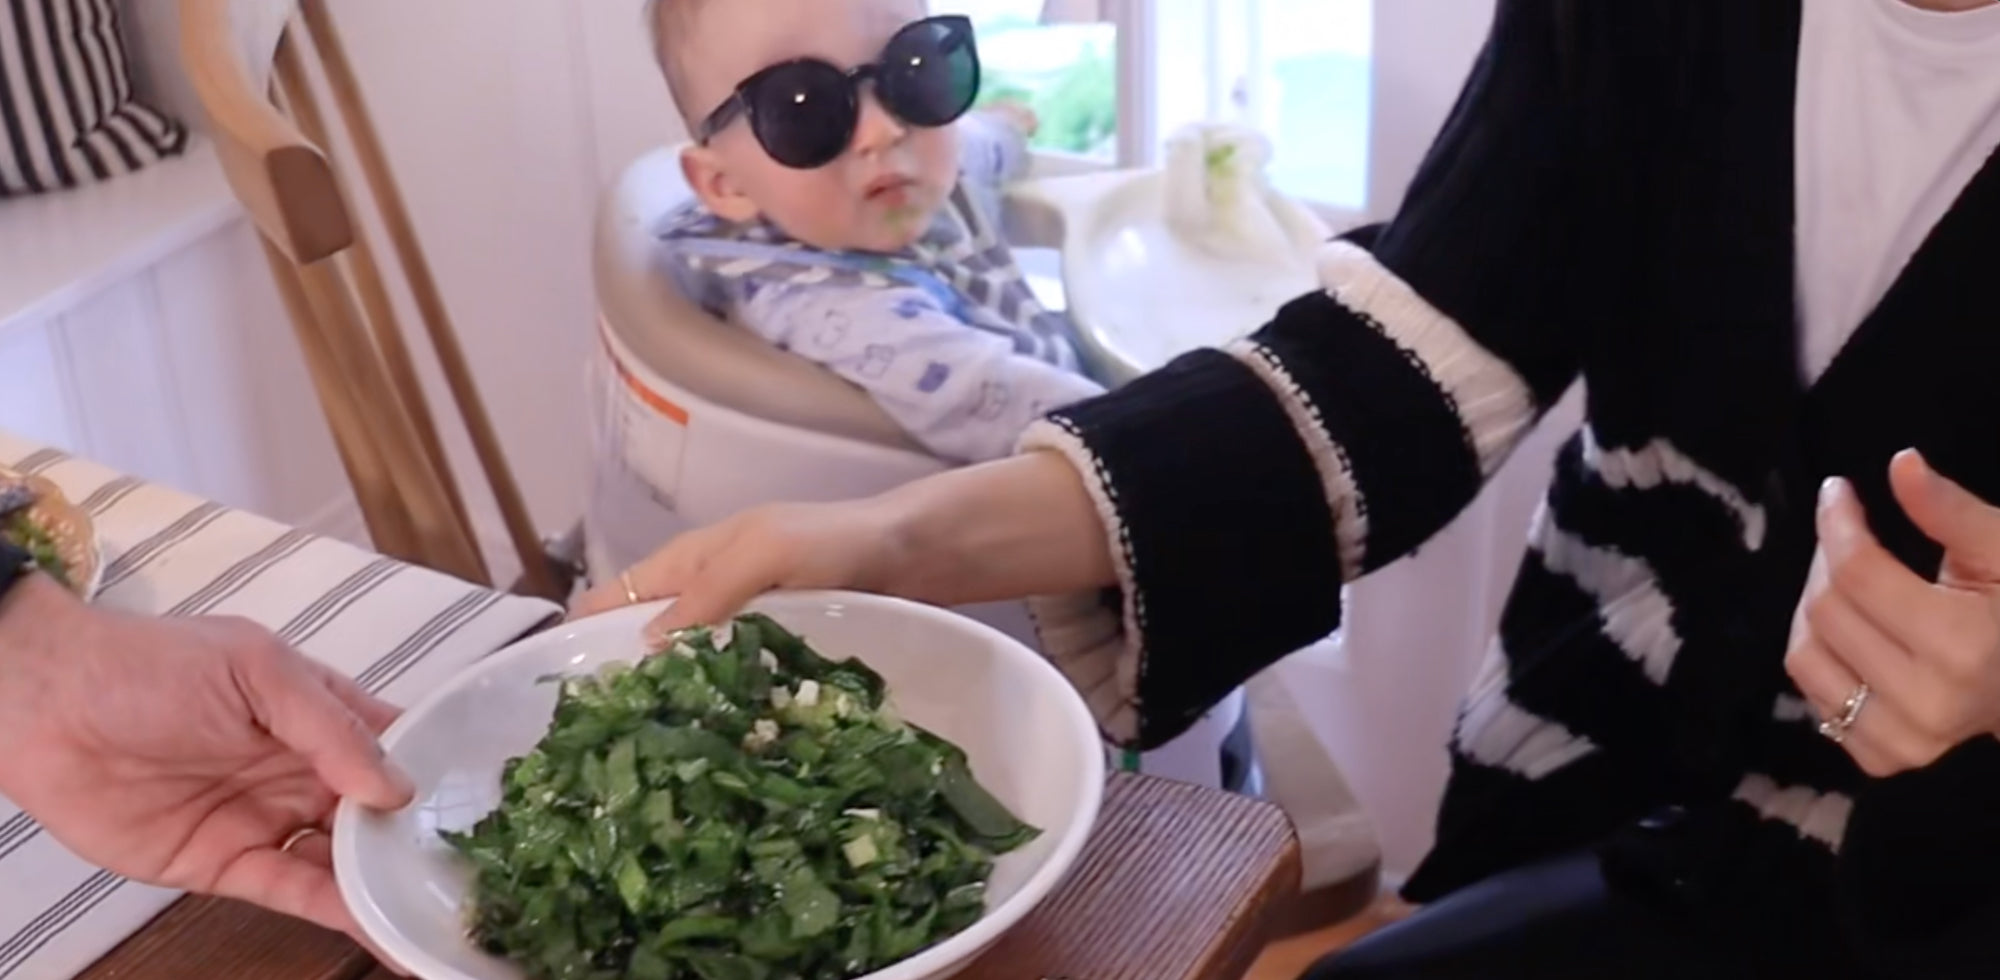 Smoke Show Home Videos Ep1 - The Best Salad Ever